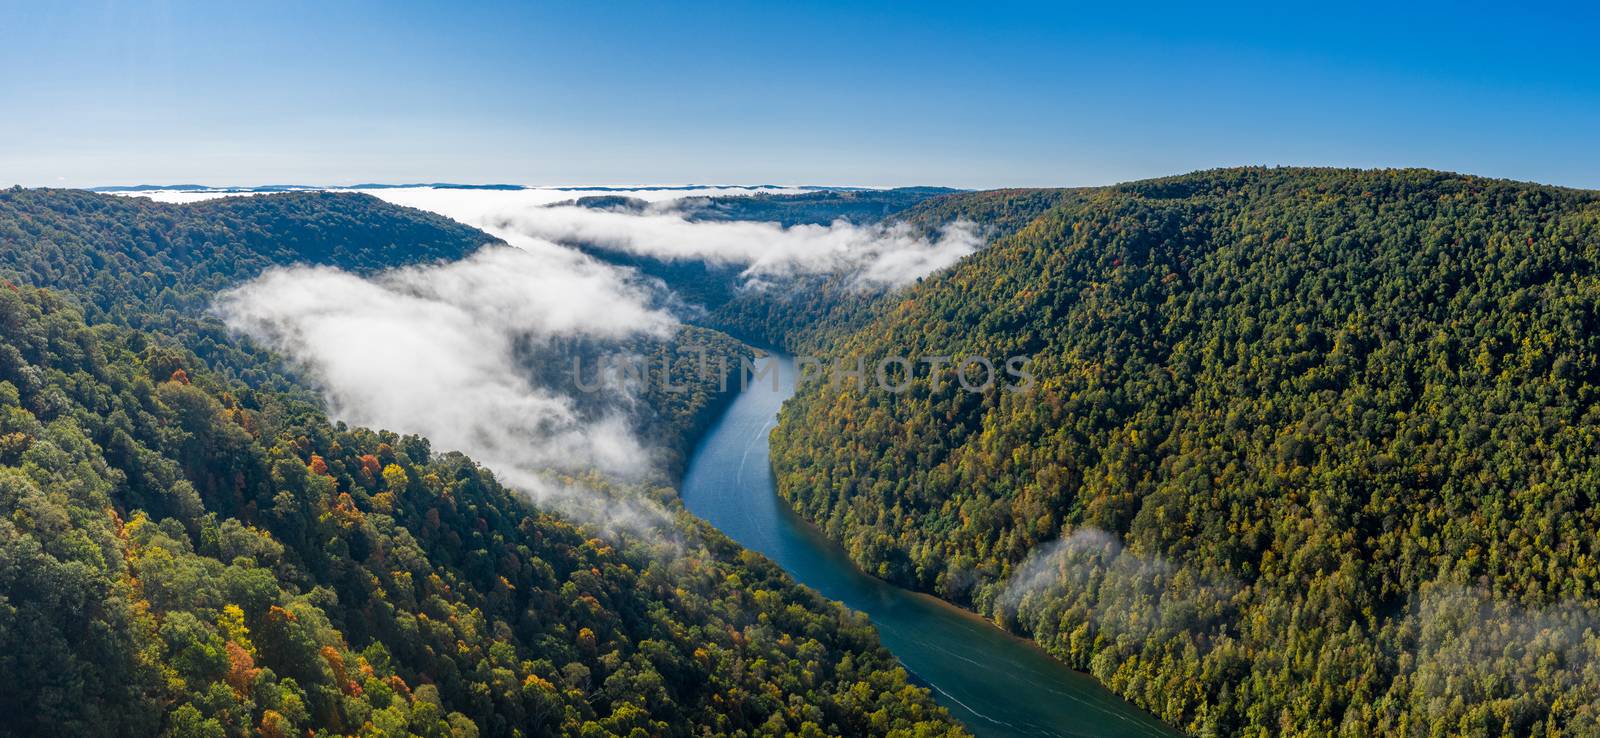 Panorama of gorge of the Cheat River upstream of Coopers Rock State Park in West Virginia with fall colors by steheap